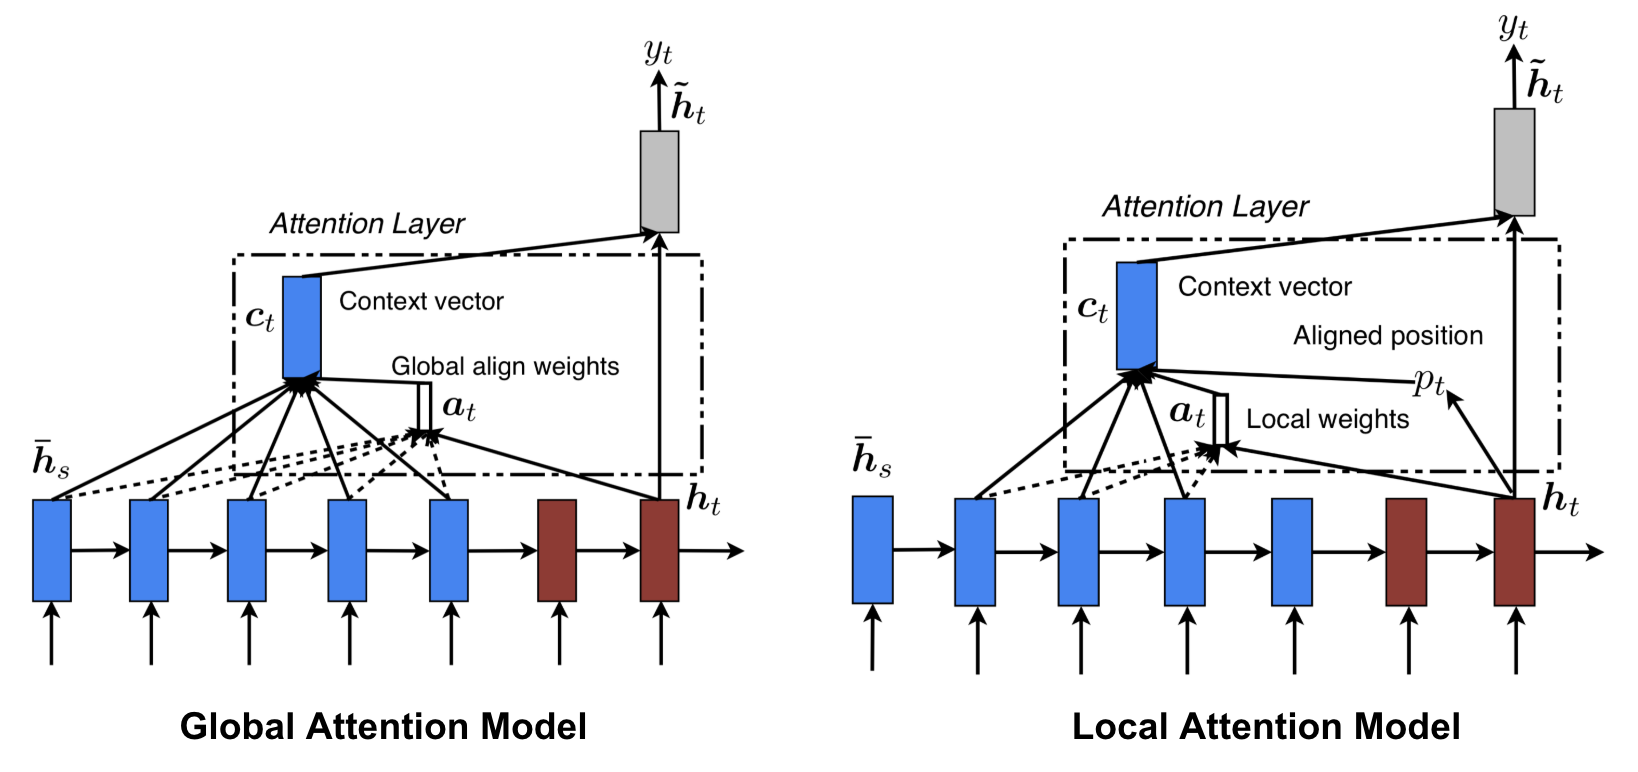 Global and local attention illustrated. Encoder in blue, Decoder in red. \(\overline{h}_s\) and $h_t$ in the image correspond to $h_t$ and $s_t$ in the previous text. Additional computations and differences to previous described architecture is found in the next sub-chapter. Image source: Fig. 2 and 3 in (Luong, Pham, and Manning 2015)